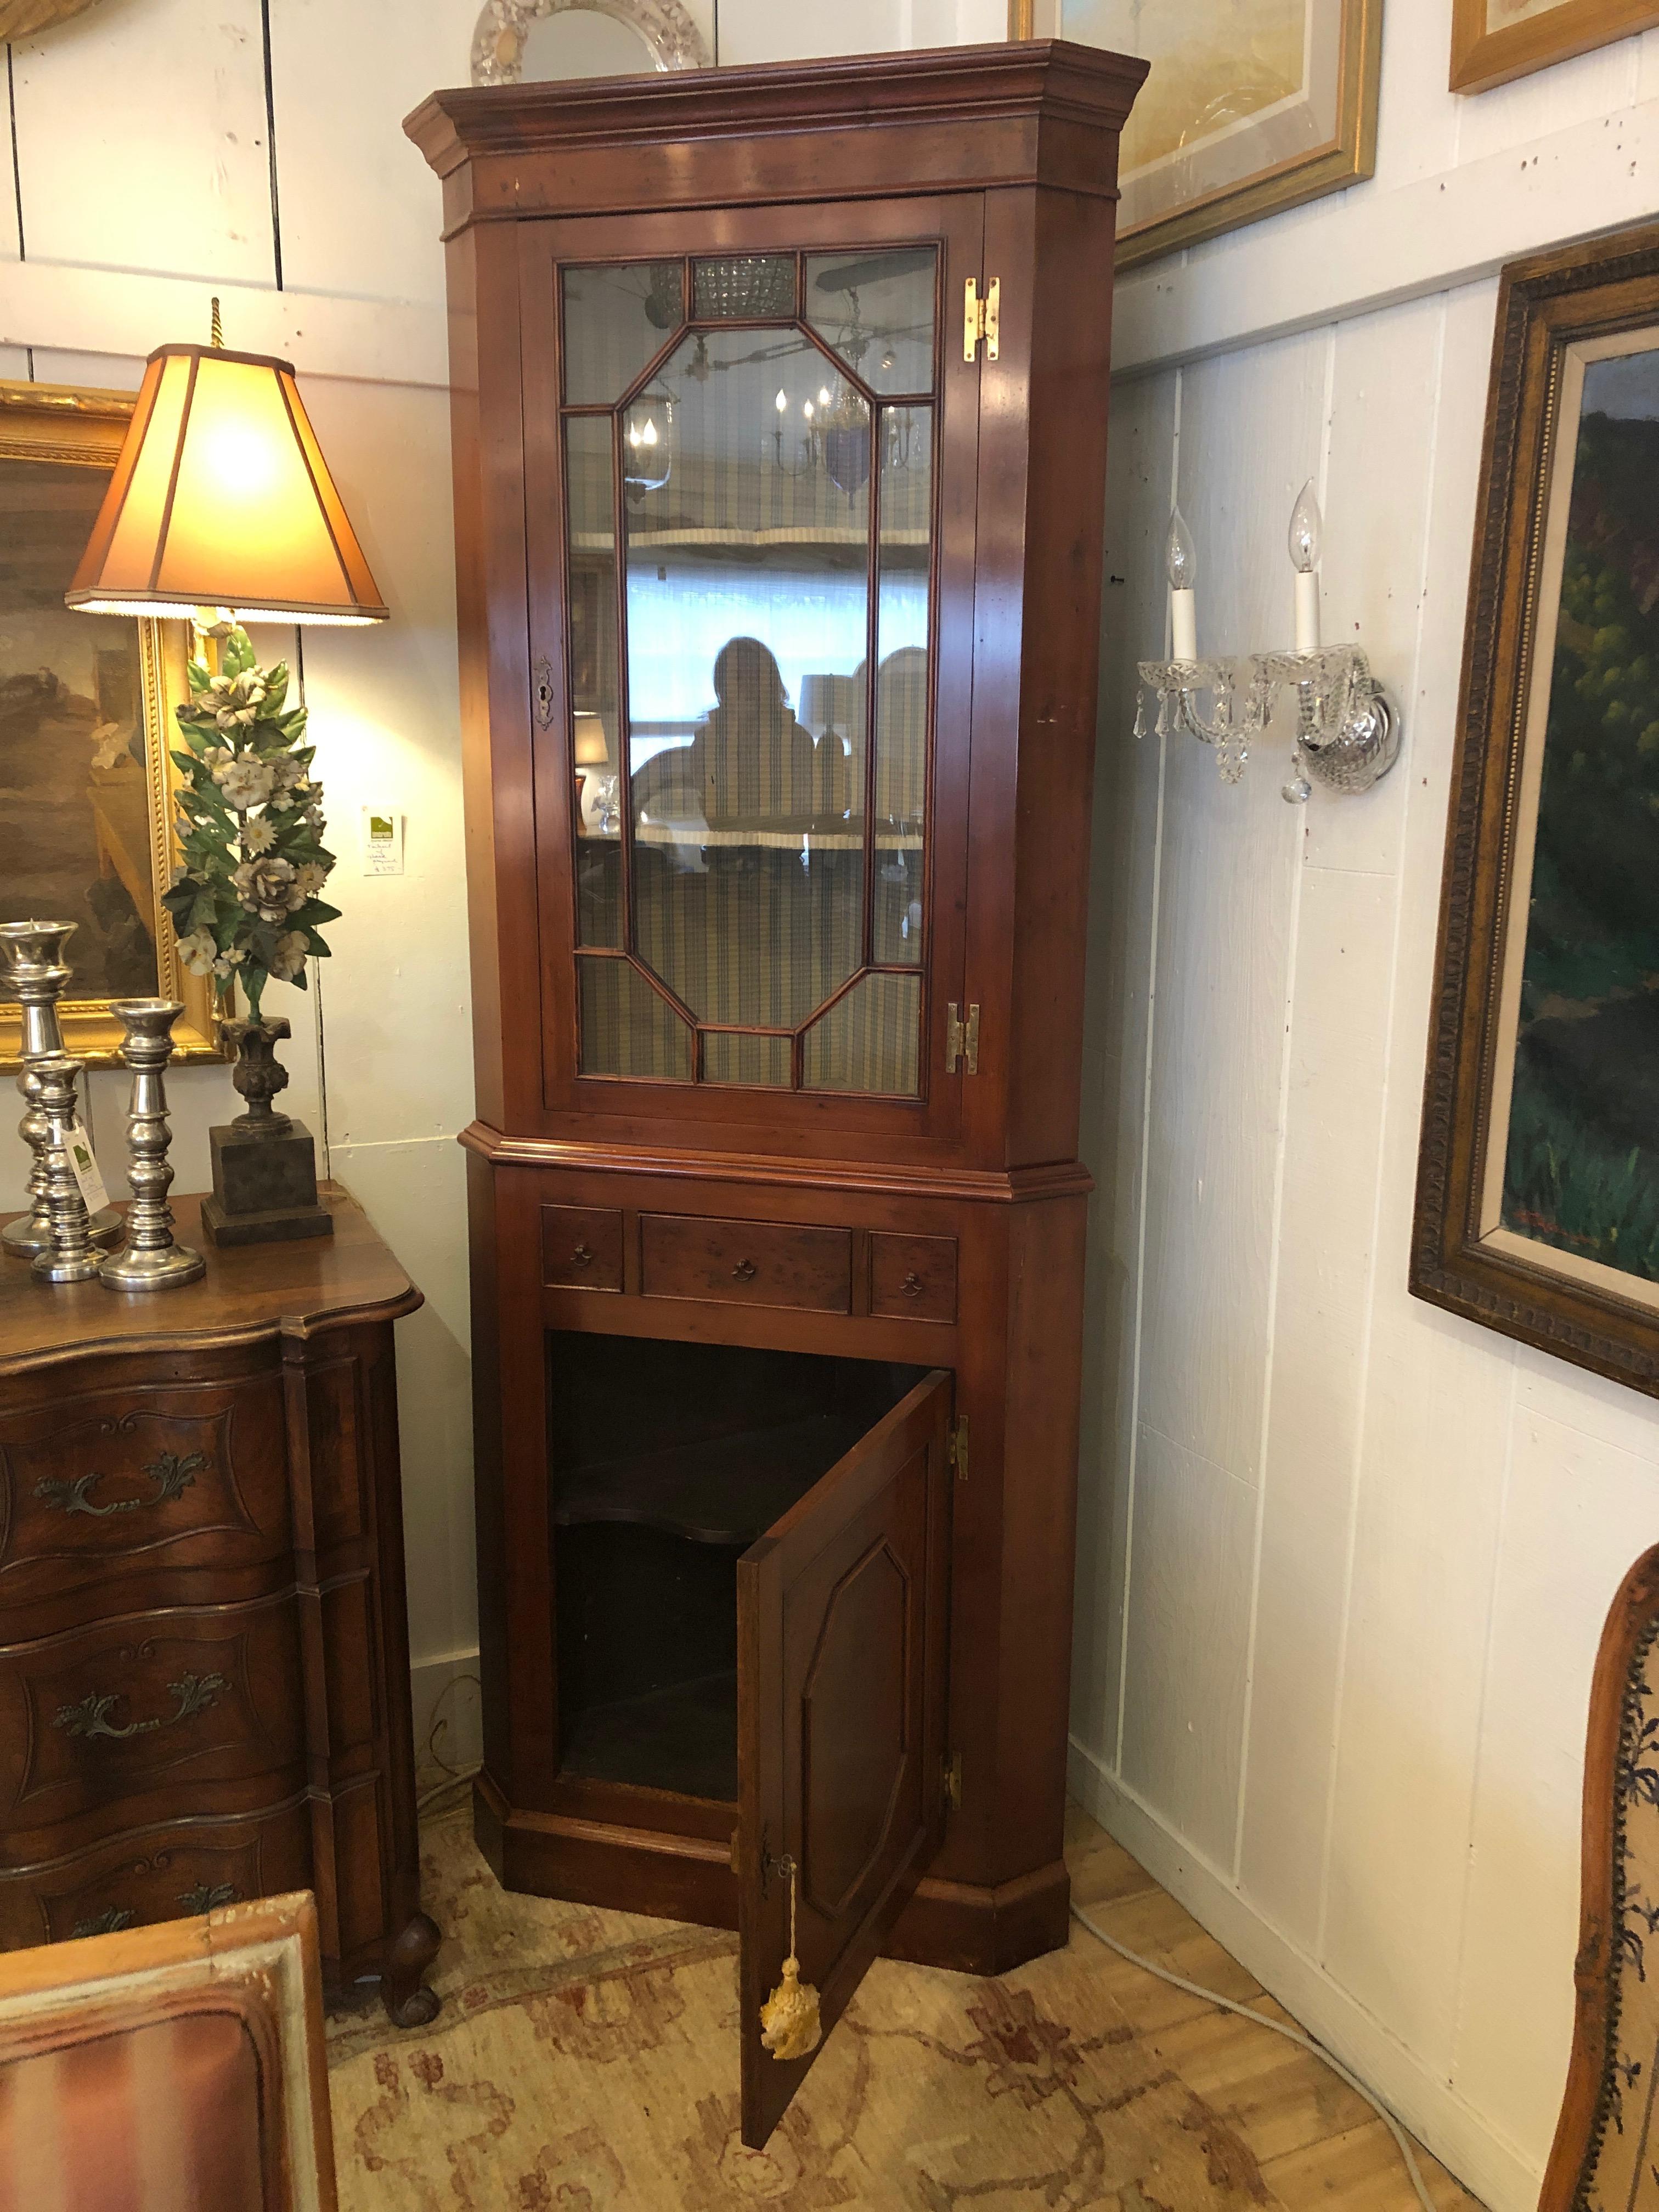 Two stunning mahogany Chippendale style corner cabinets having glass doors on upper half with beautiful designed mullions, simple crests at the top with sophisticated lines, a single drawer and paneled door below with storage inside. Interior of the